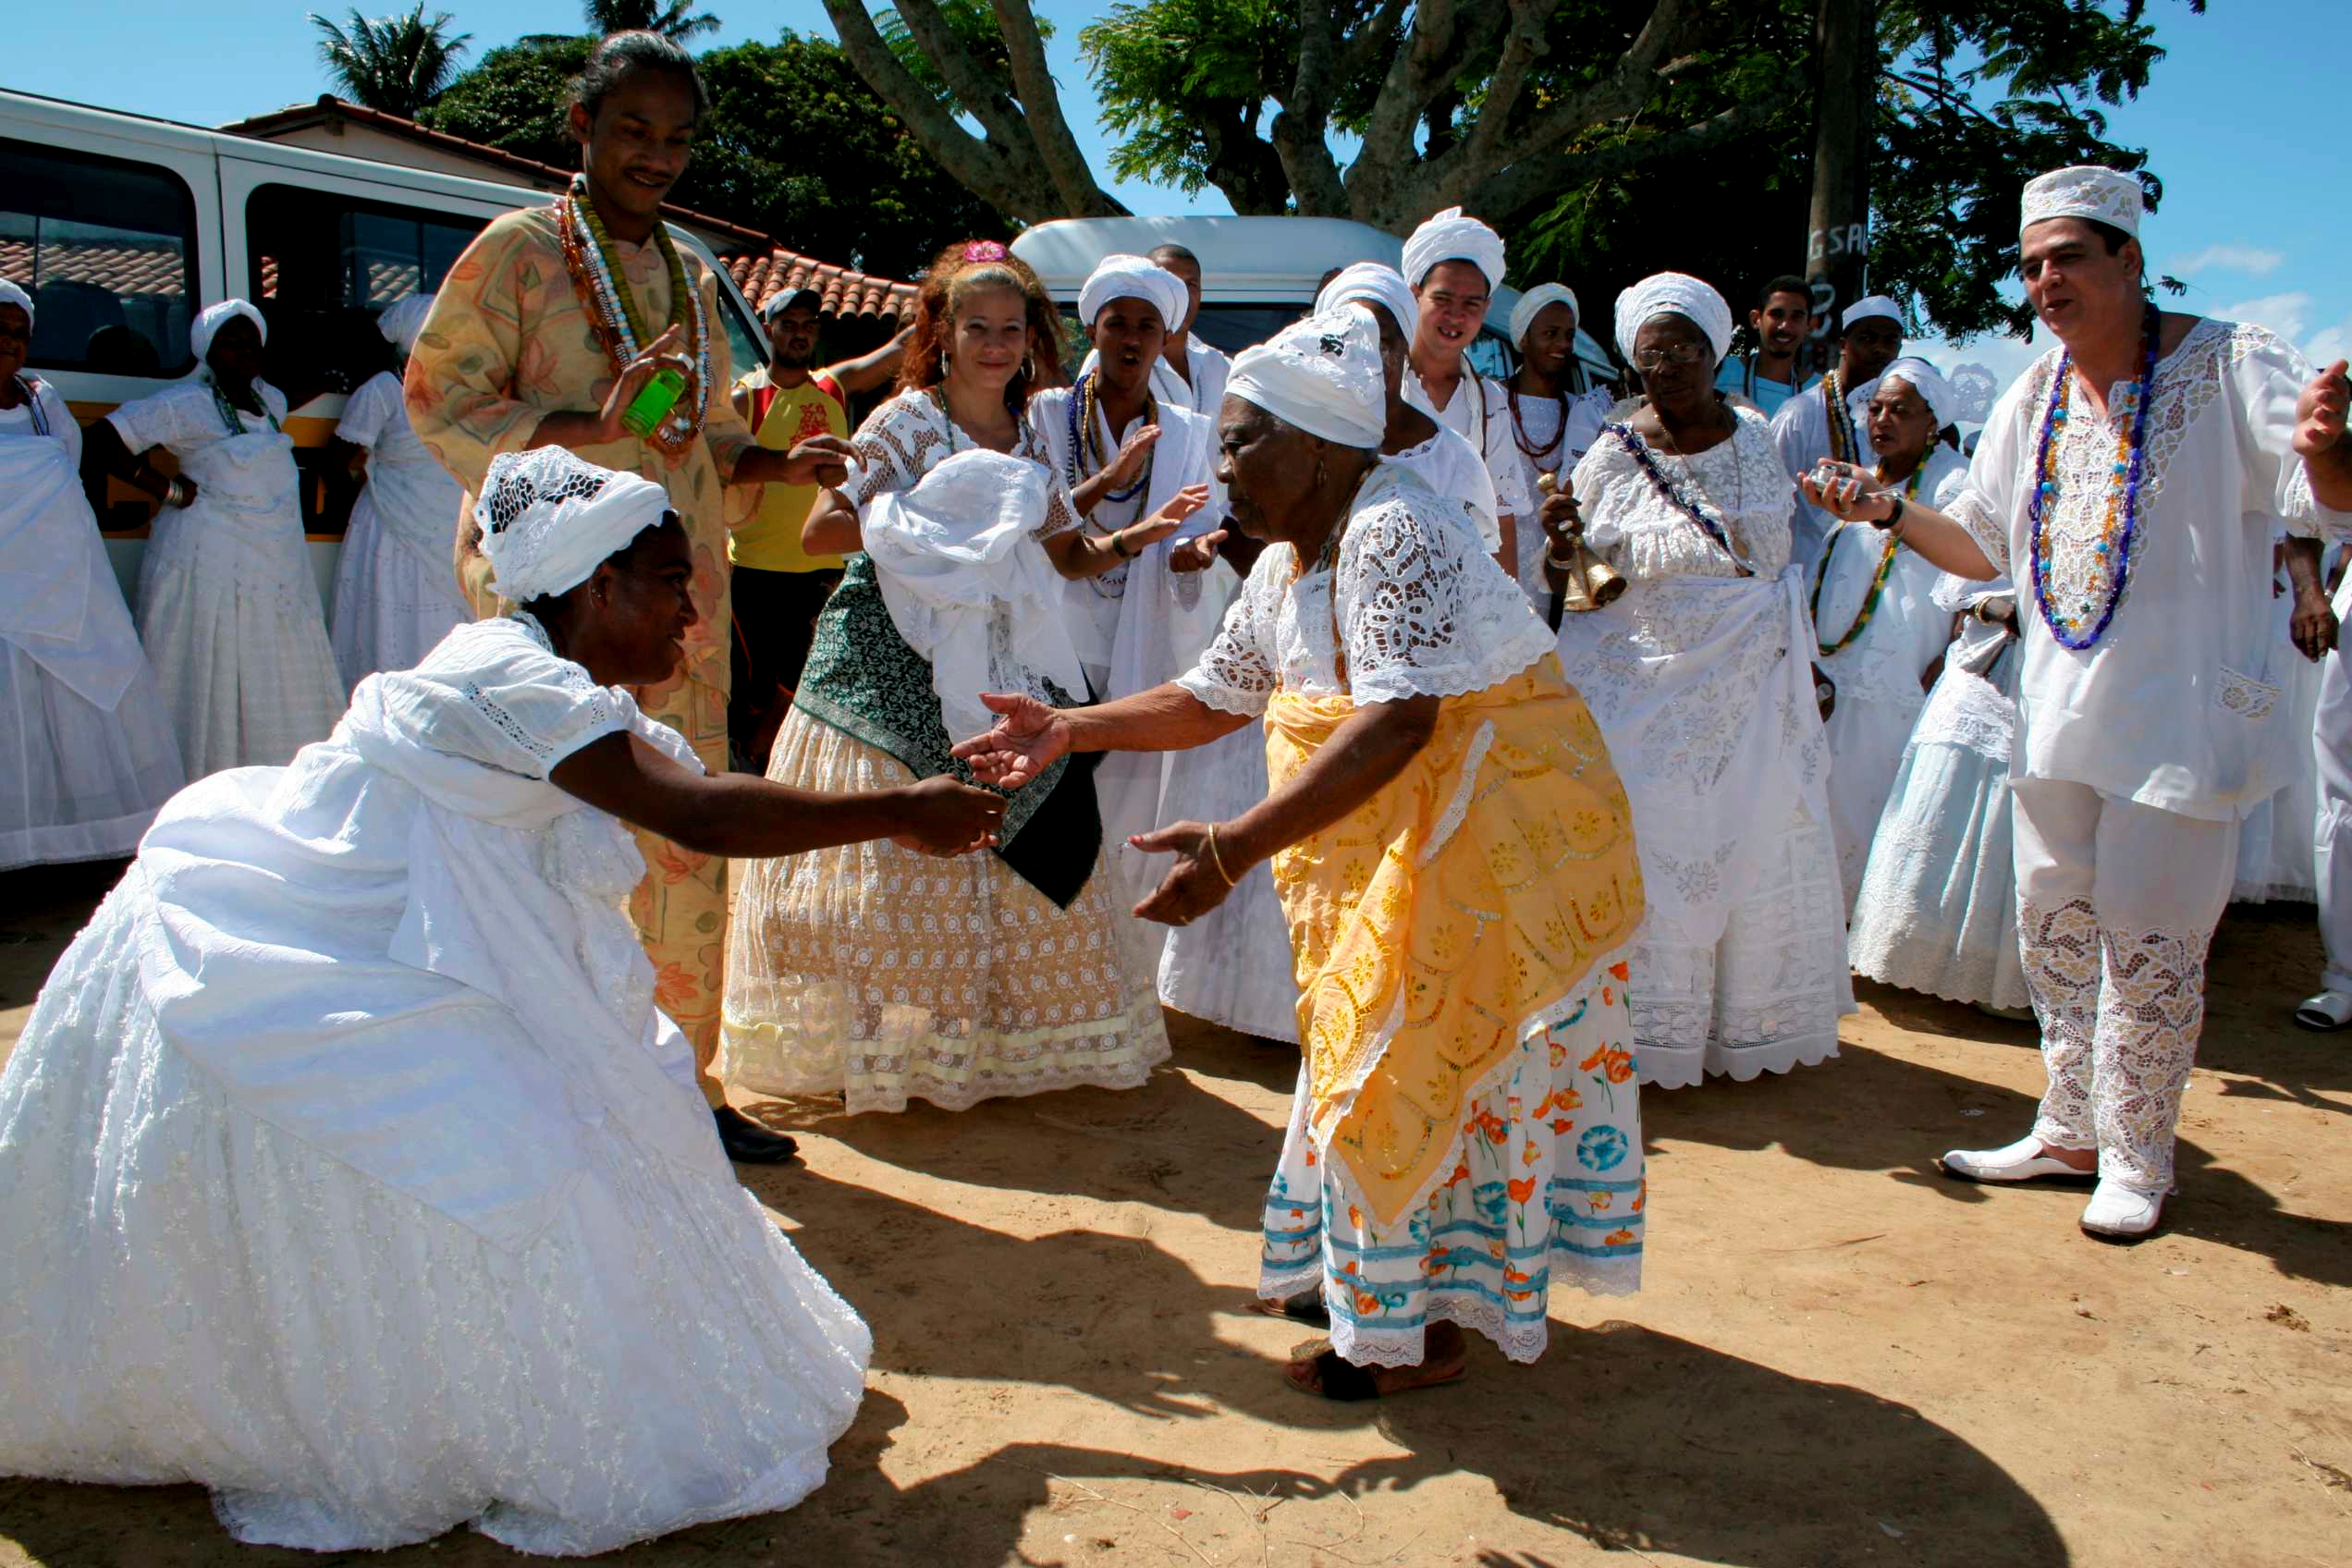 Candomble supporters at religious event